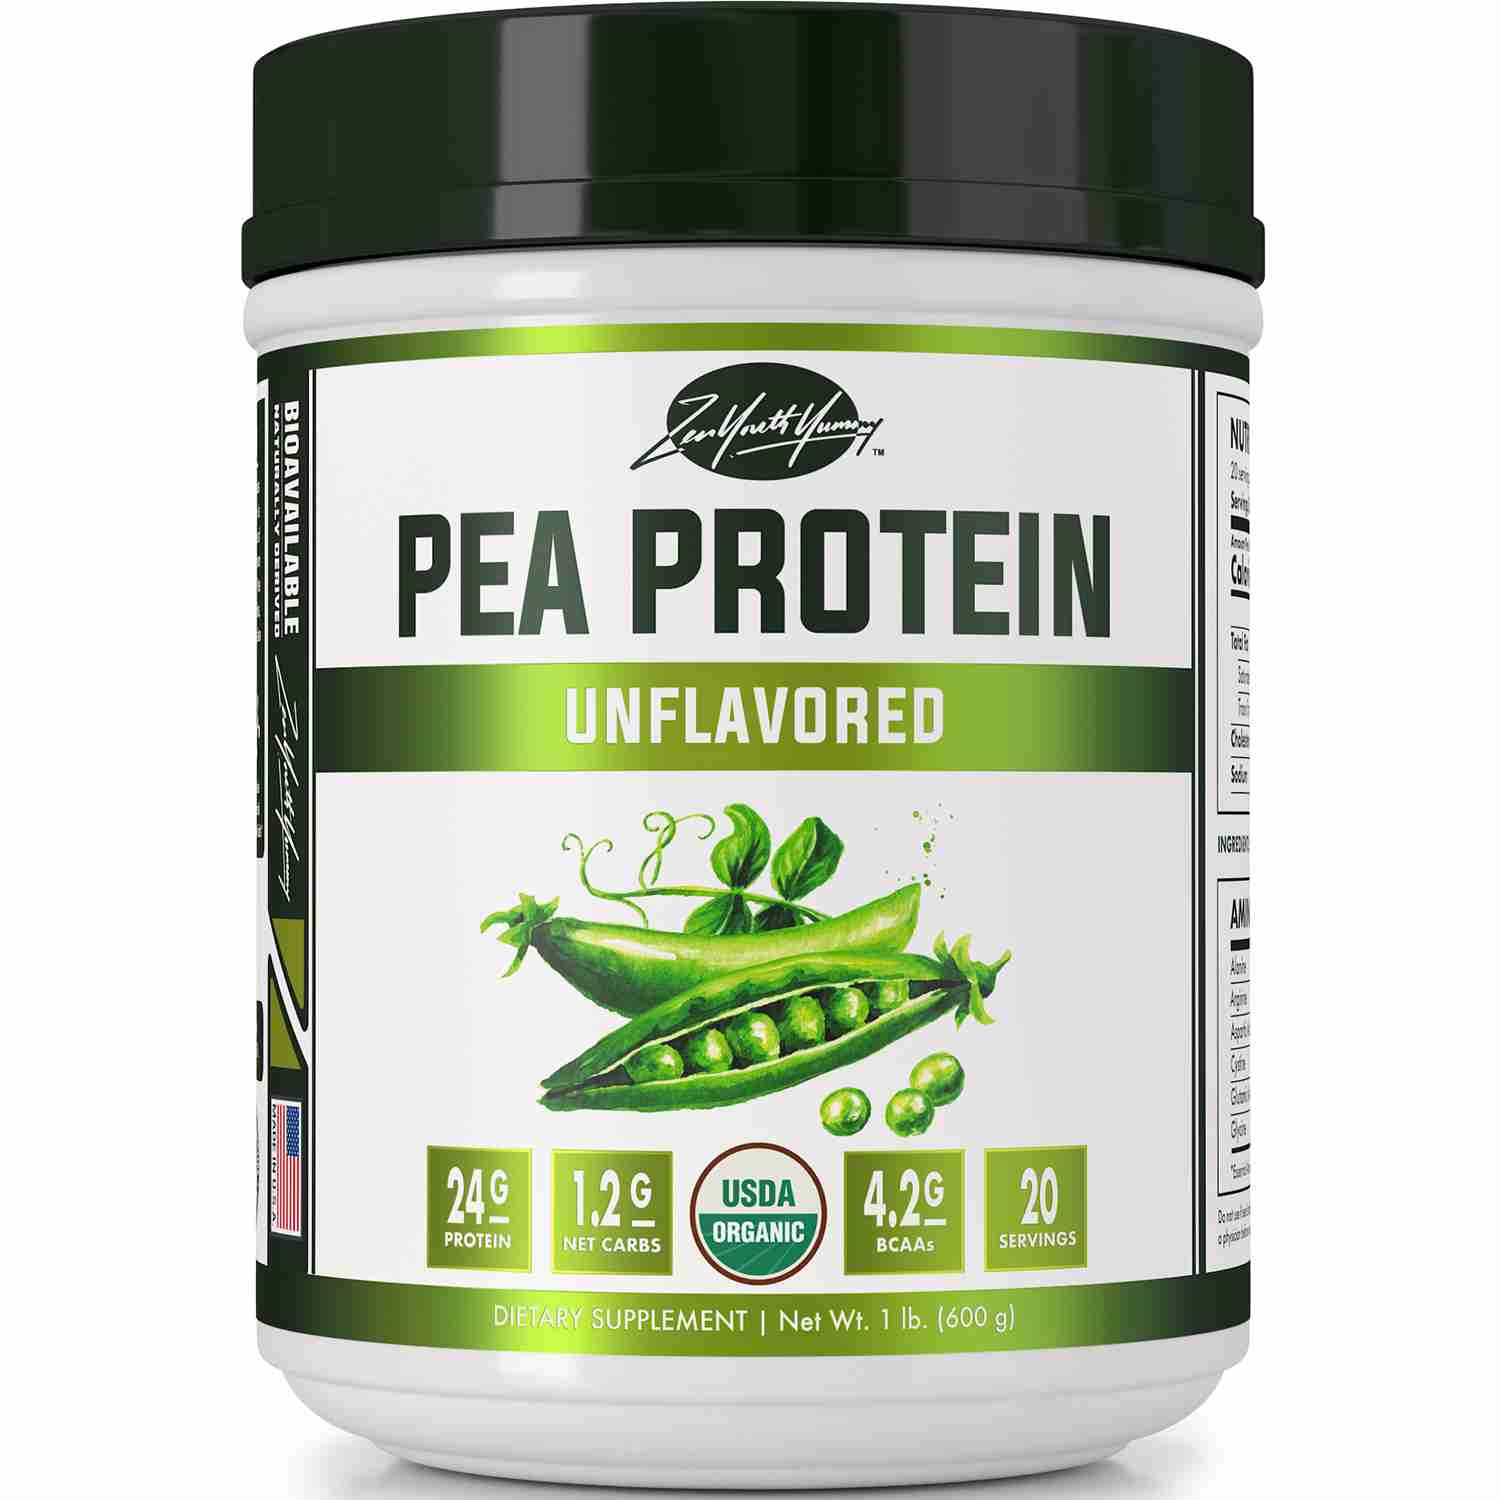 pea-protein-powder with cash back rebate